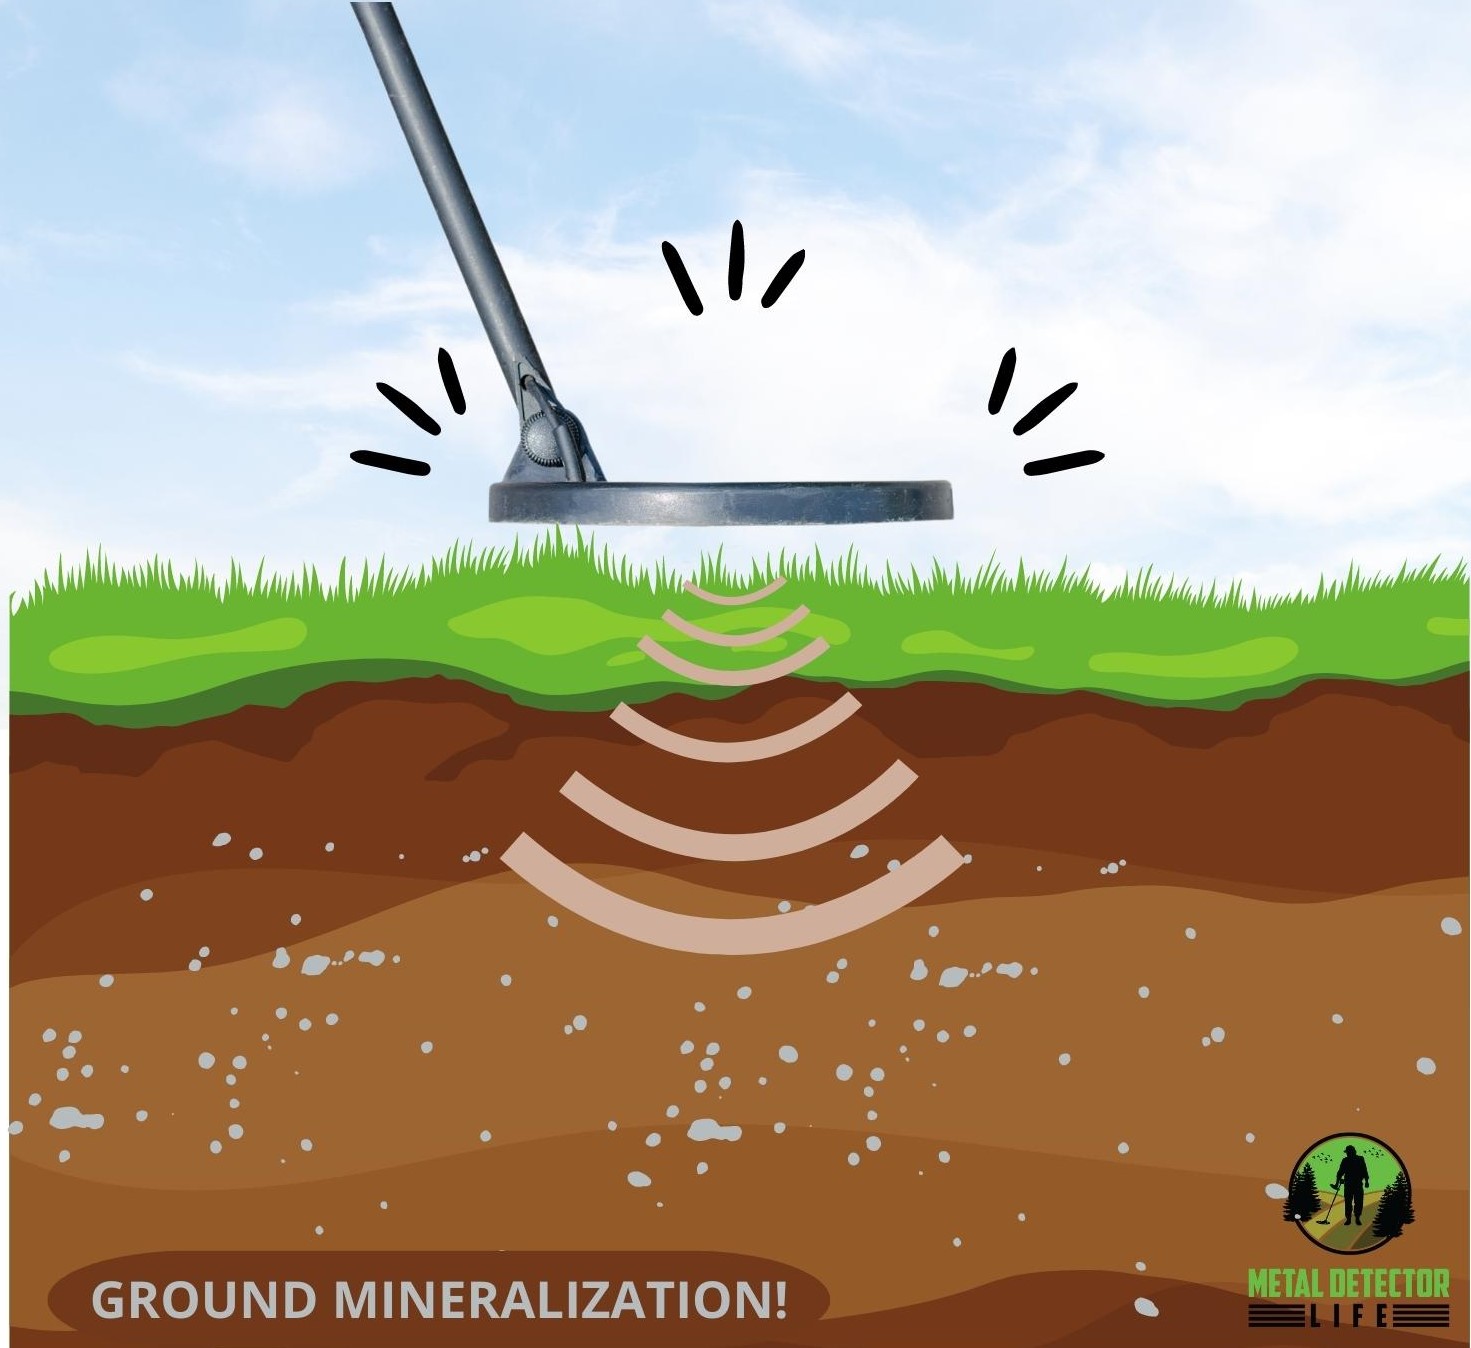 The metal detector reacts to ground mineralization when using a too high sensitivity level.